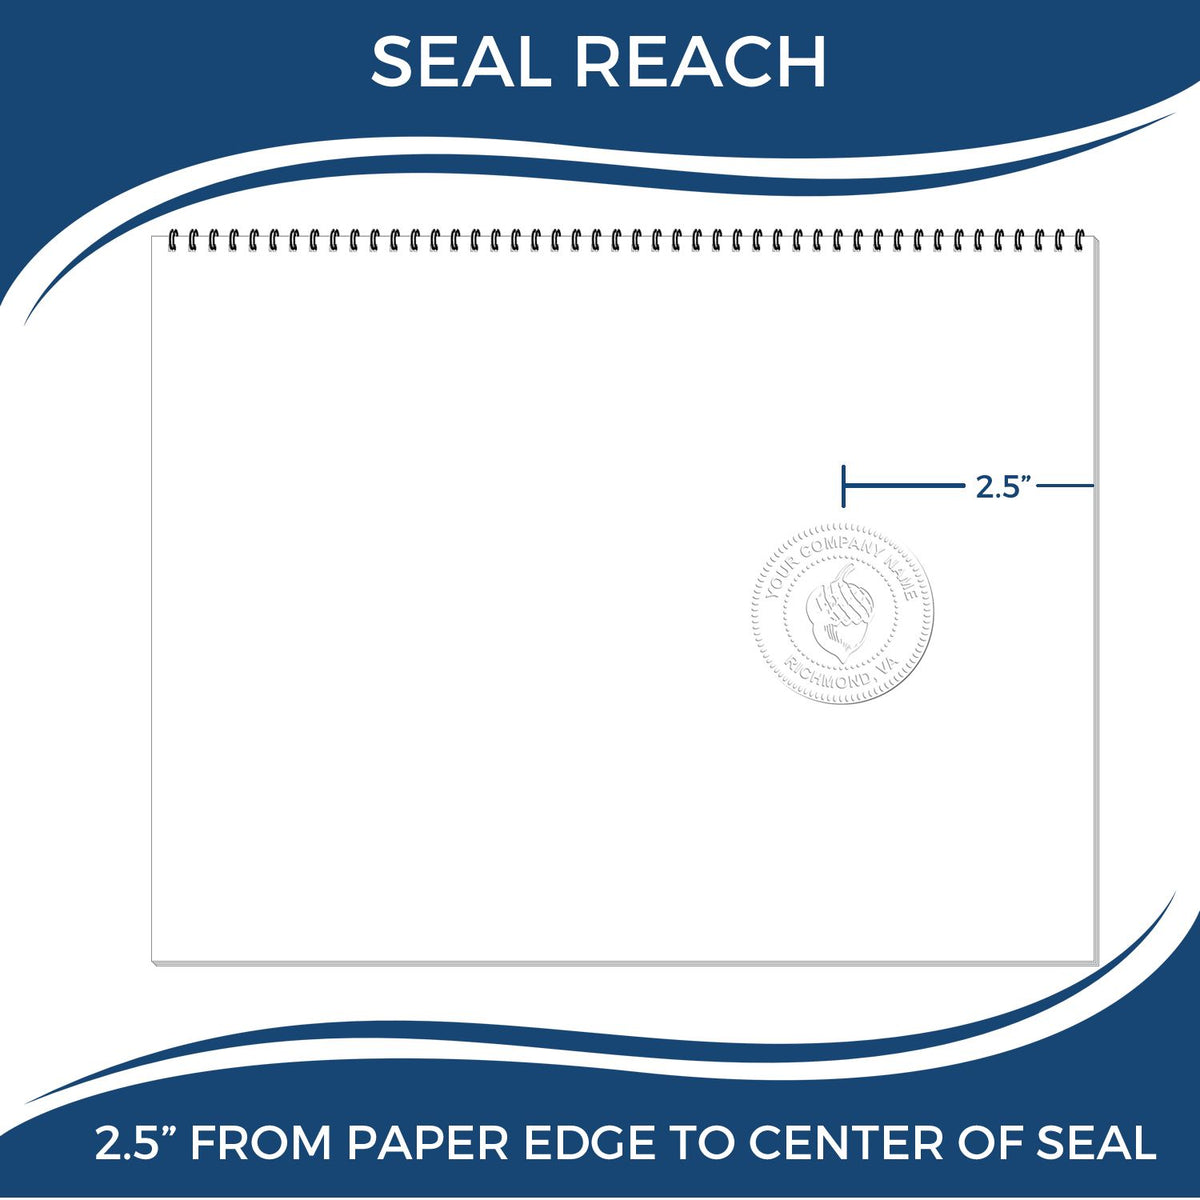 An infographic showing the seal reach which is represented by a ruler and a miniature seal image of the Heavy Duty Cast Iron Missouri Land Surveyor Seal Embosser